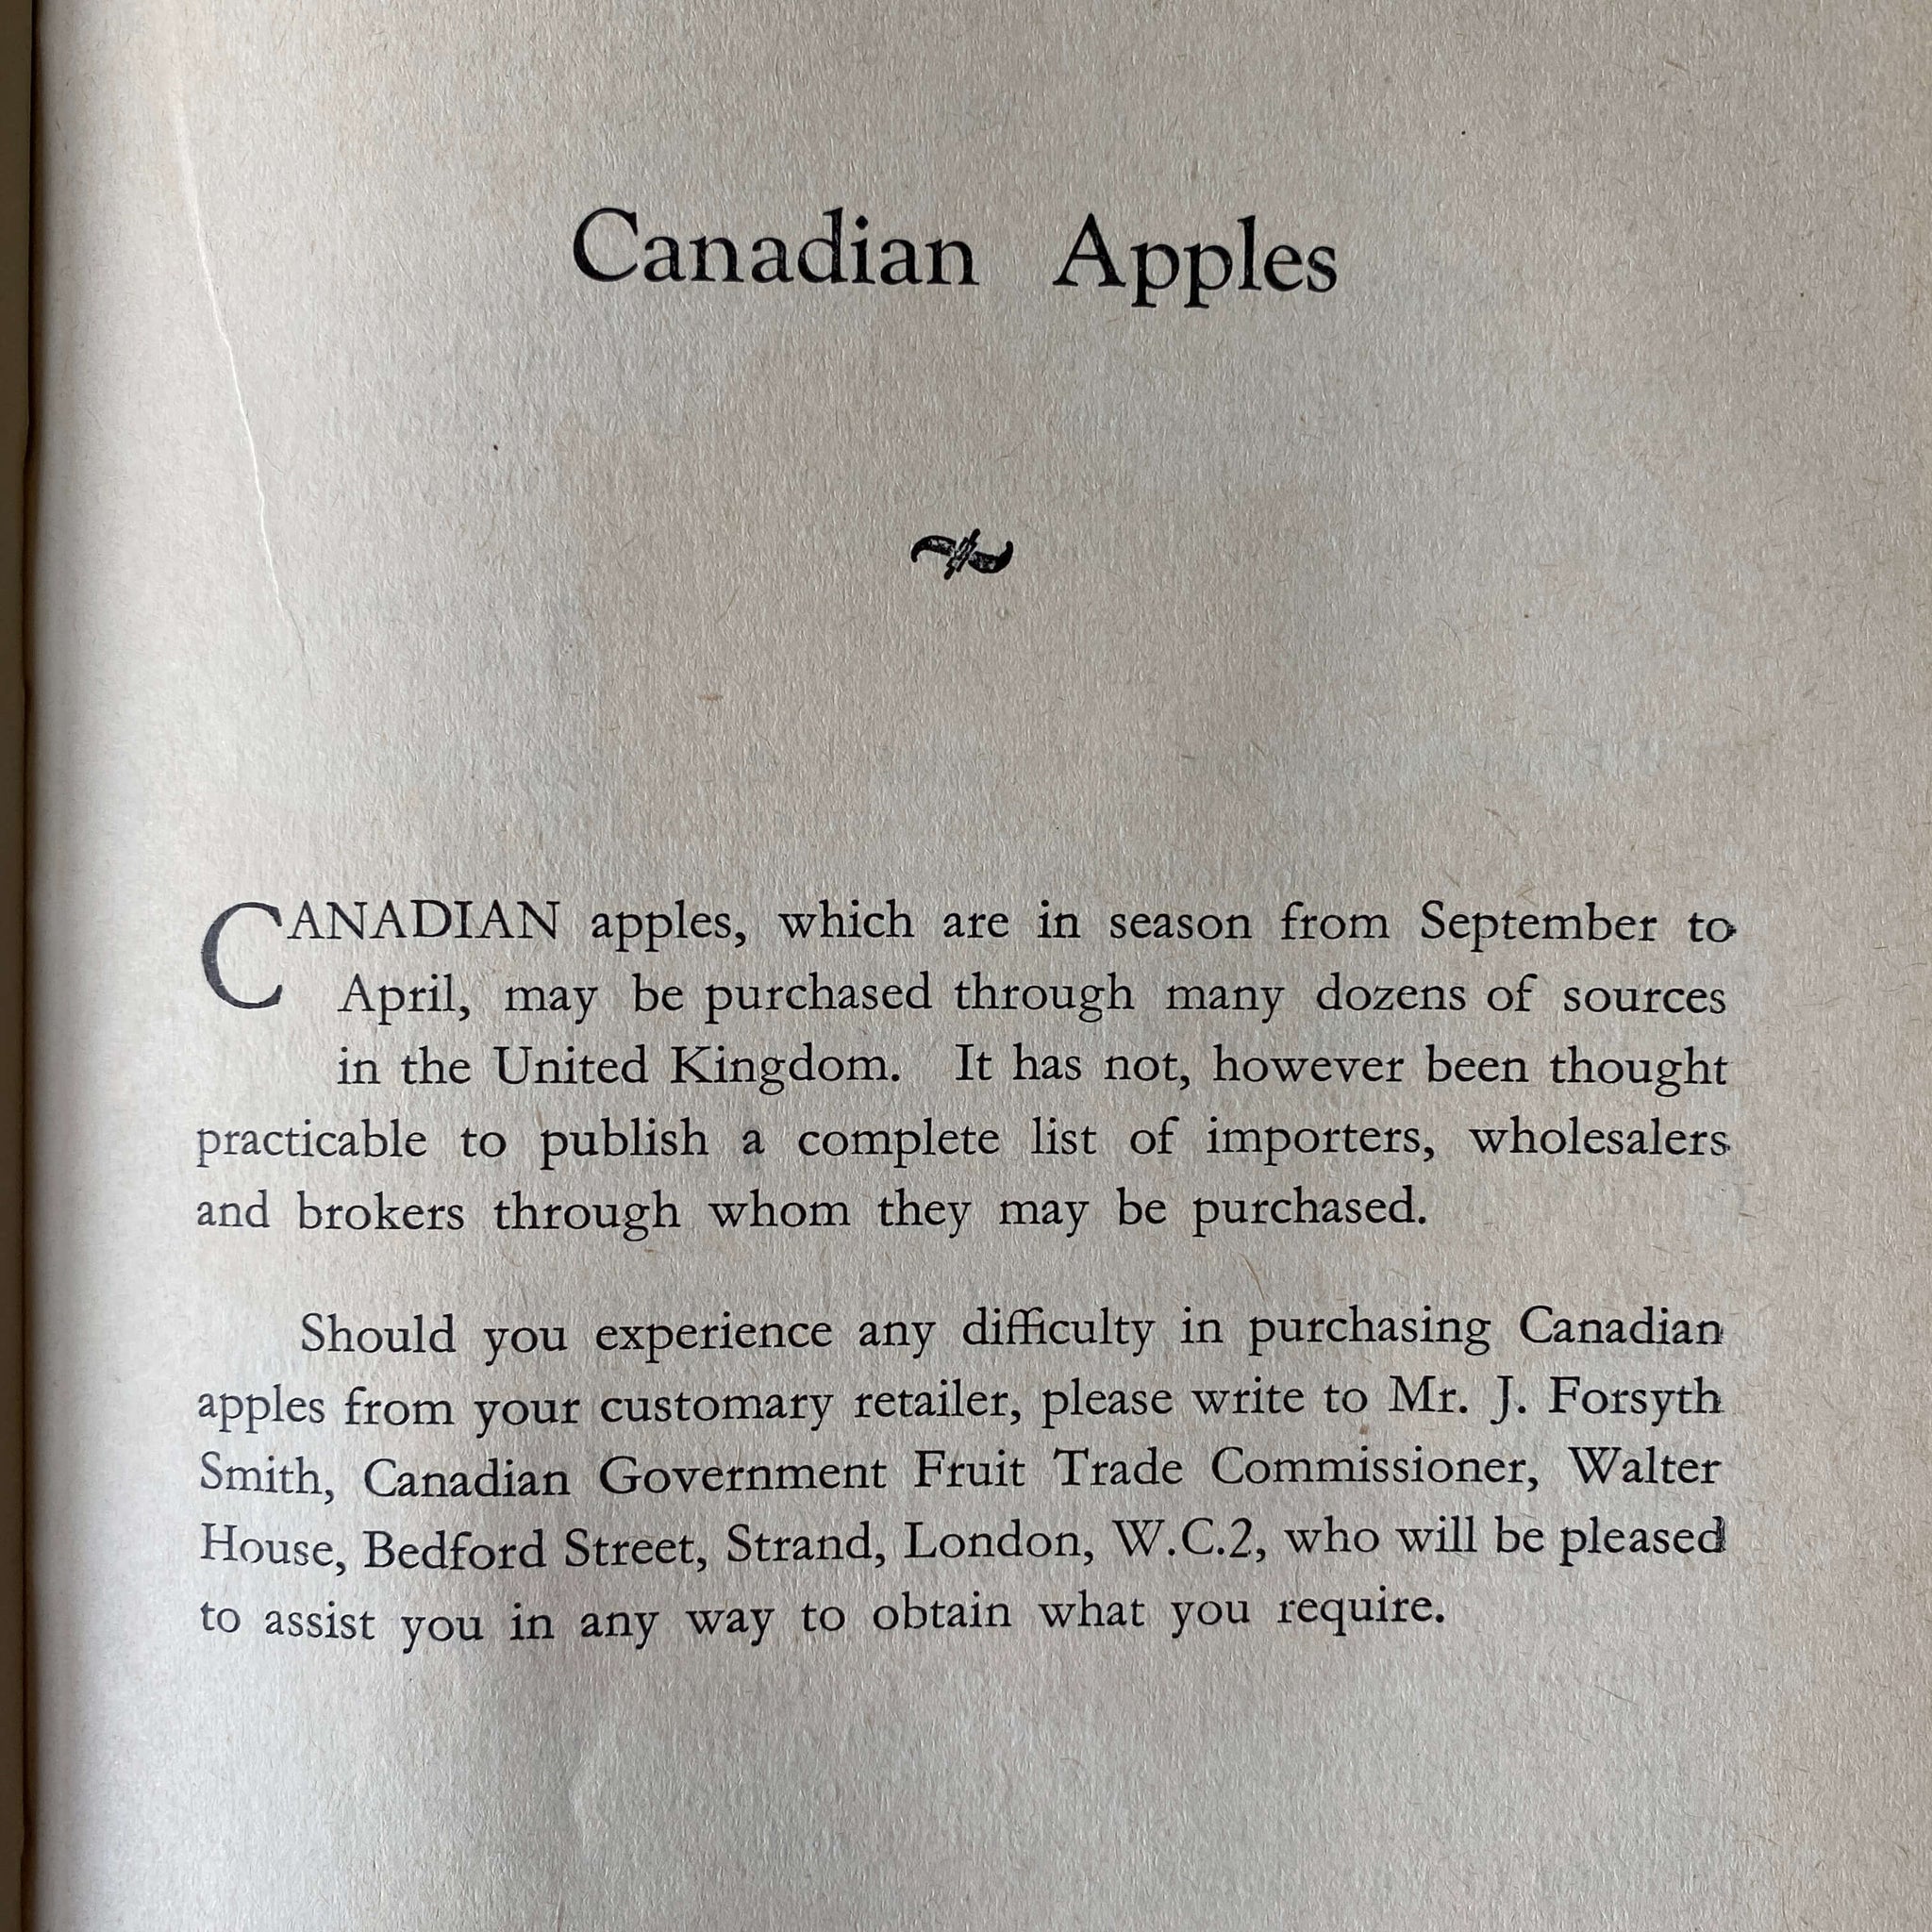 The Maple Leaf Canadian Recipe Book - Rare 1930s Canada Cooking Booklet